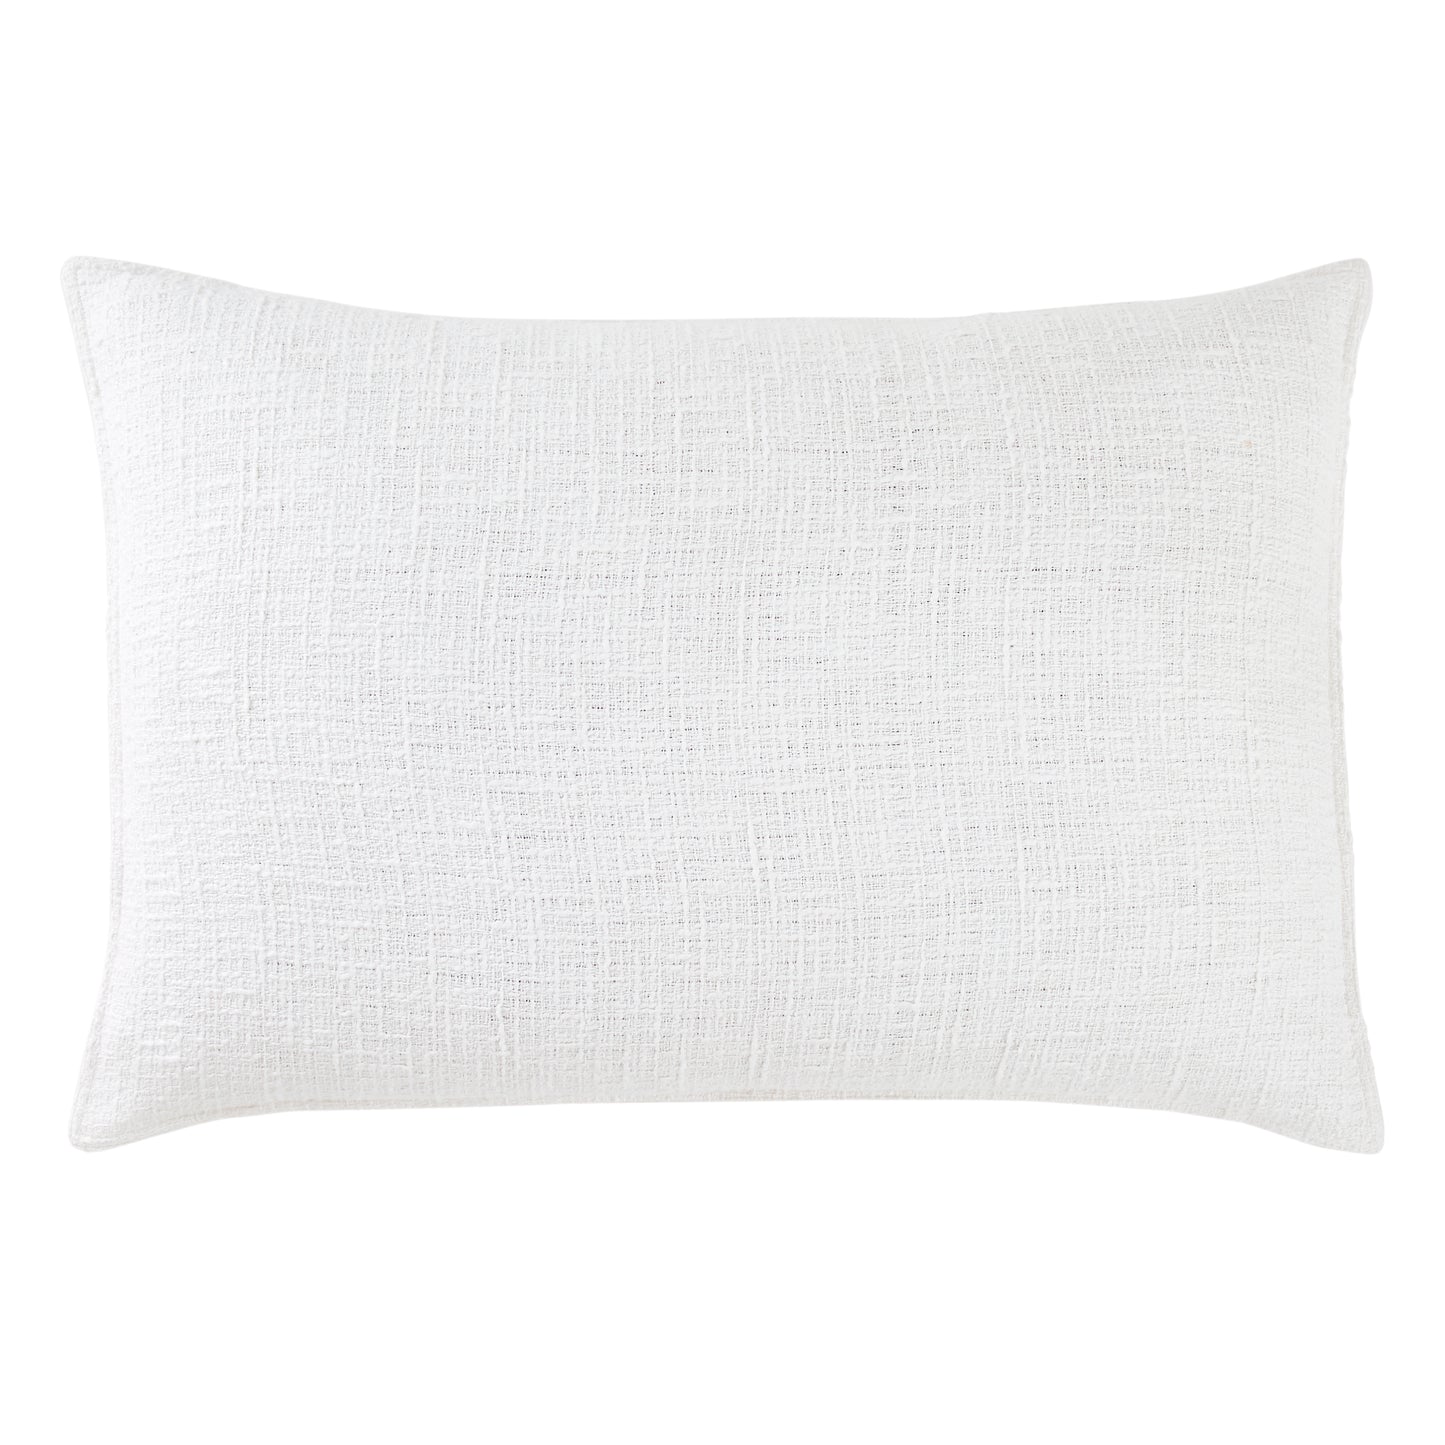 DKNY PURE Texture Bedding Duvet Collection White Sham